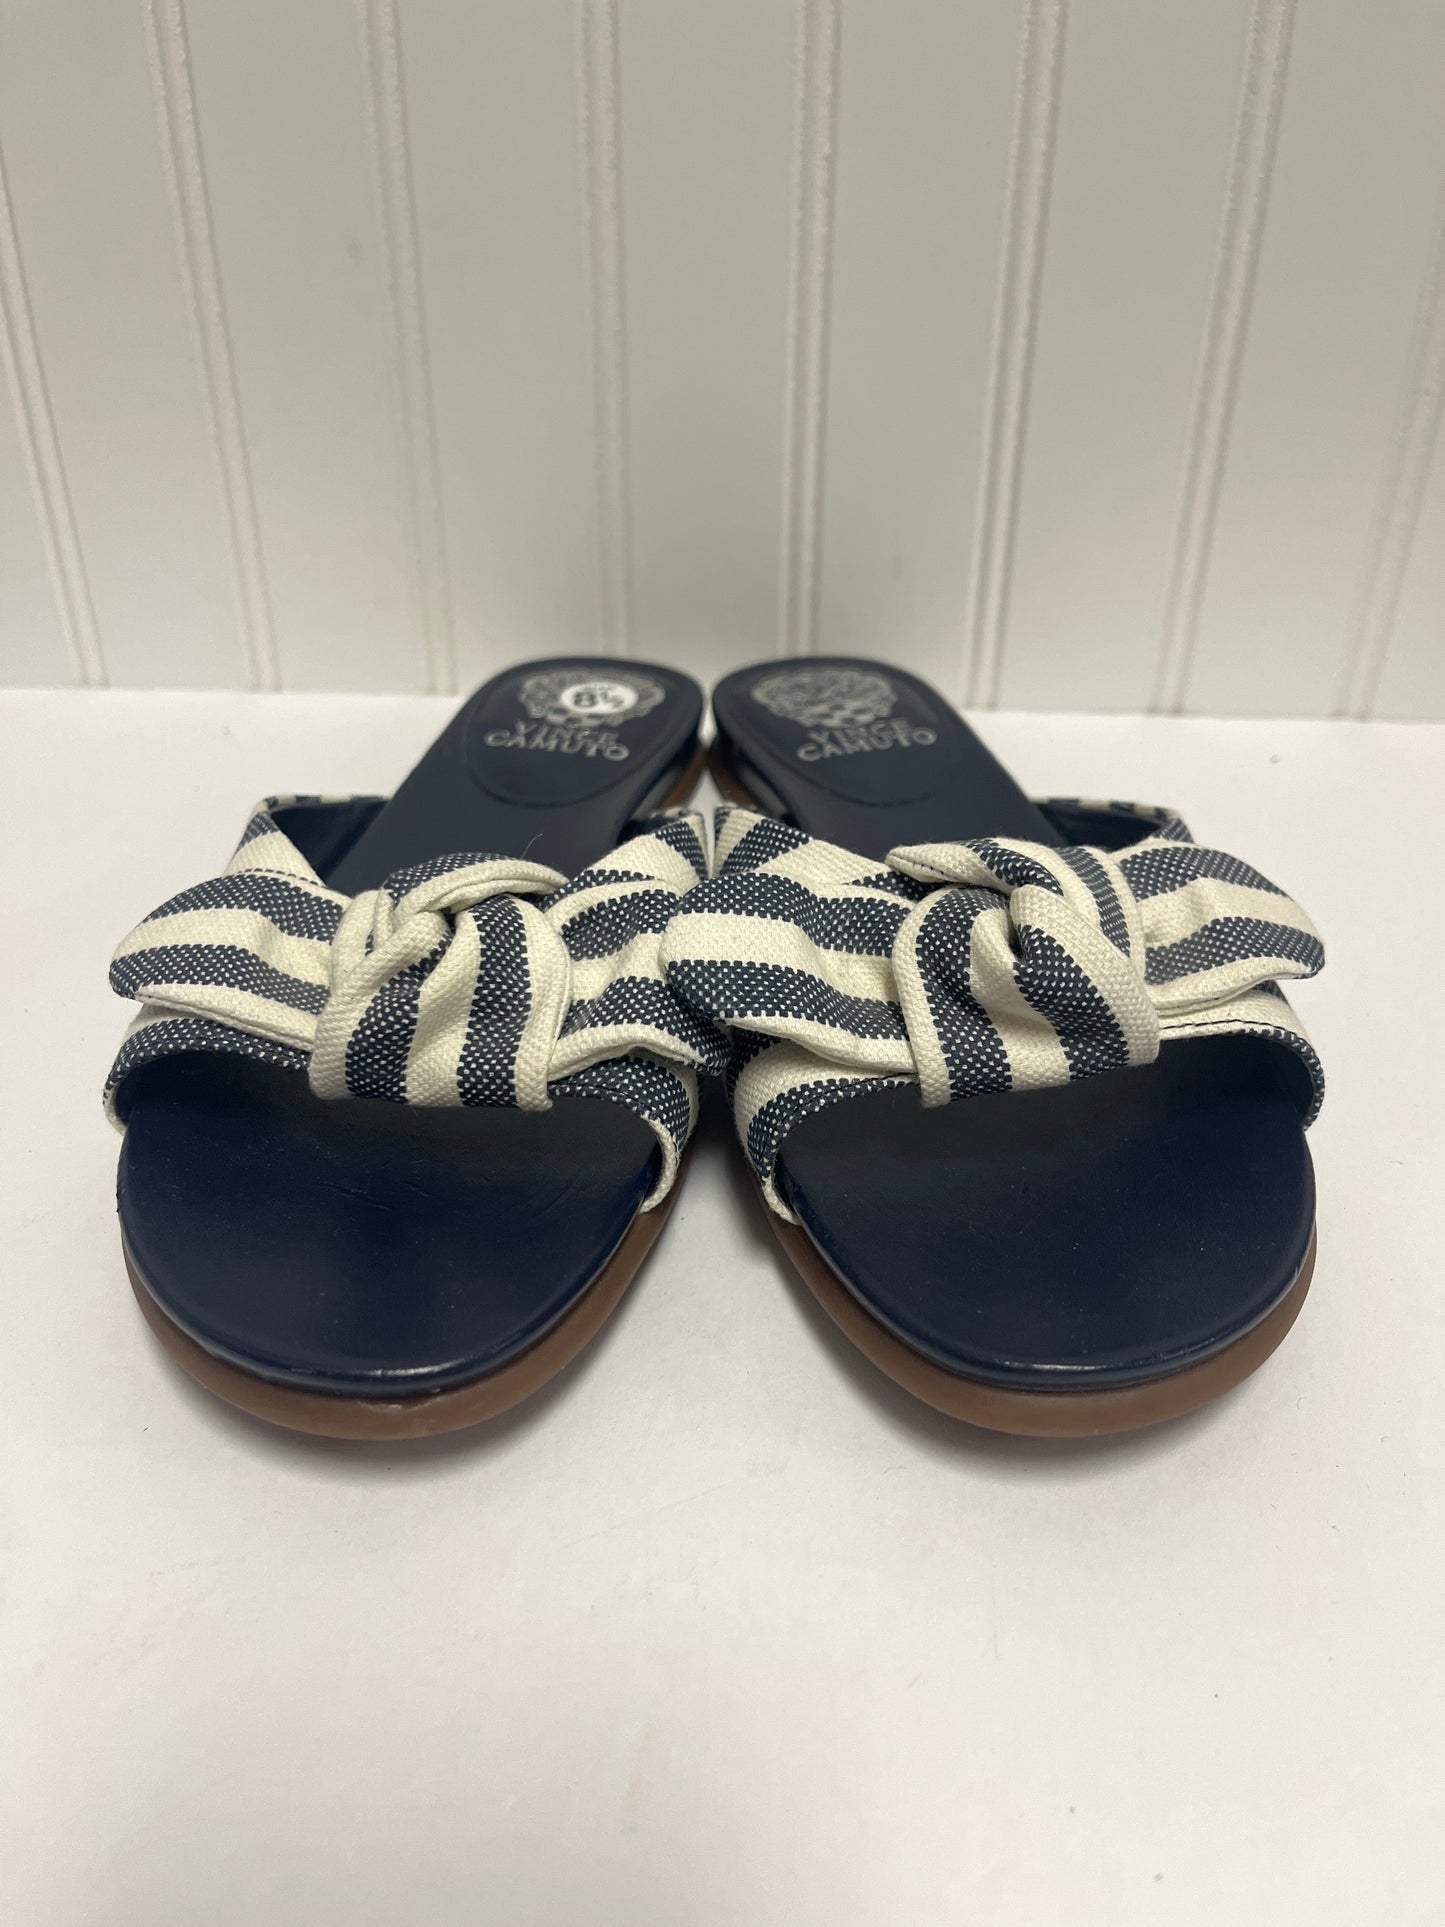 Sandals Flats By Vince Camuto  Size: 8.5